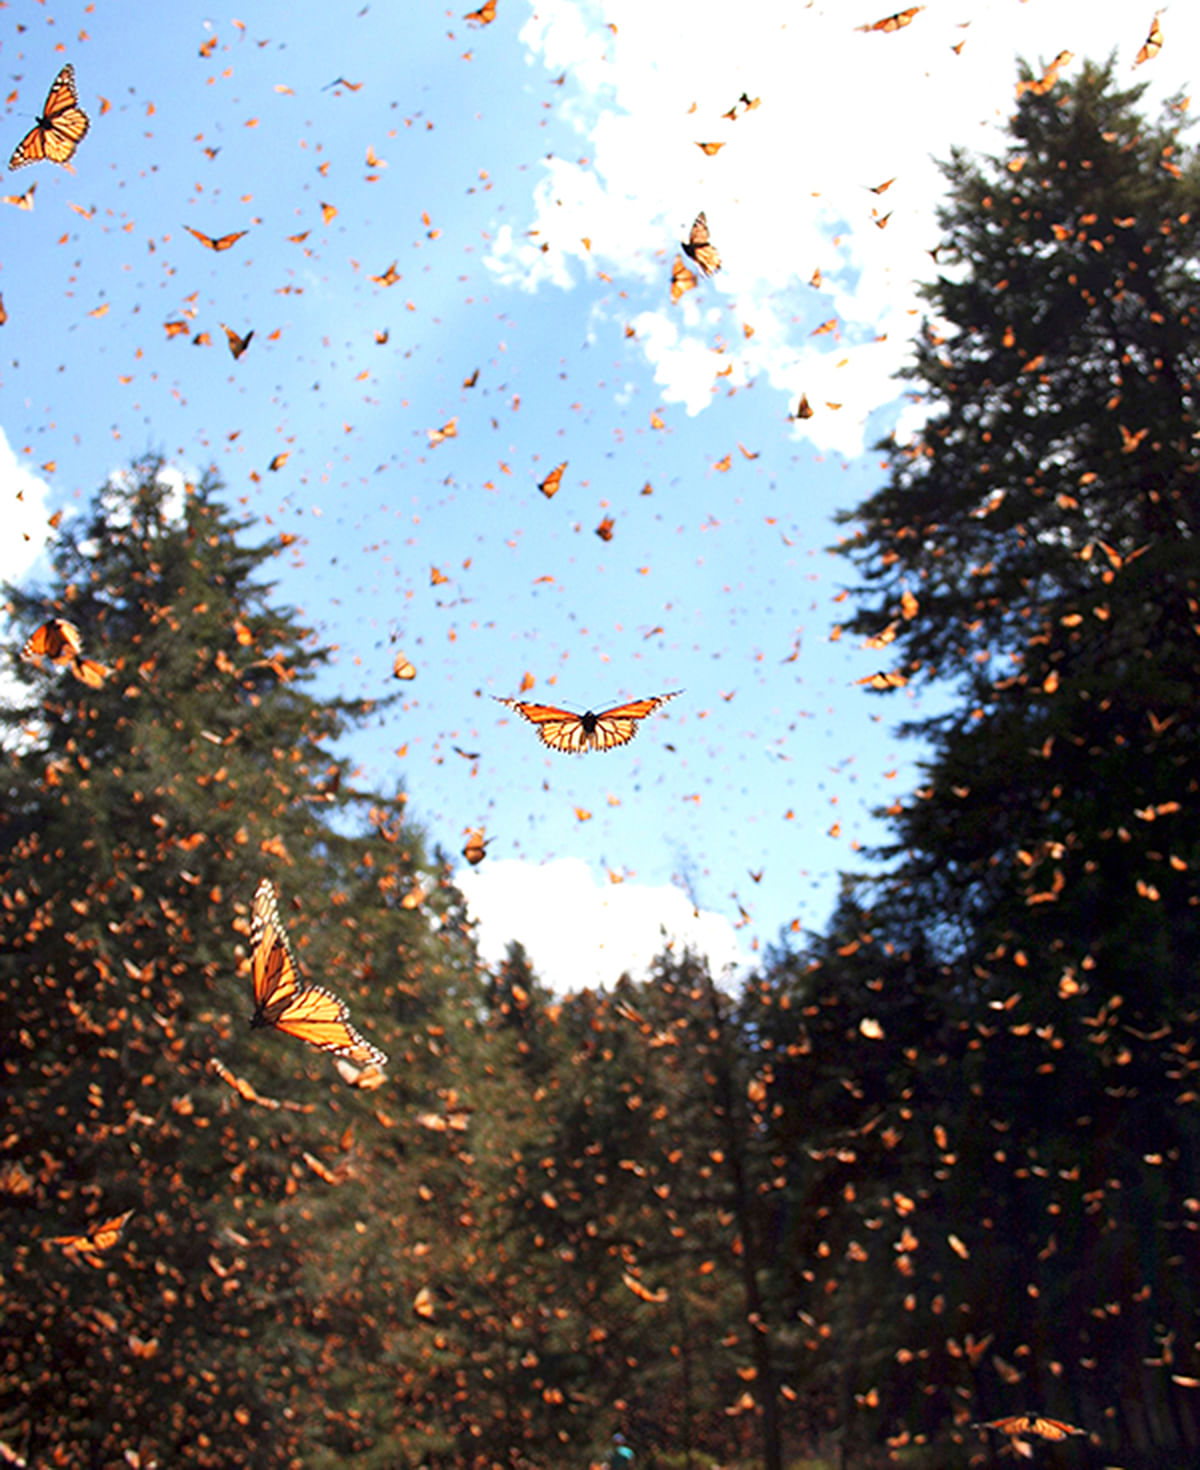 Monarch butterflies take to the sky in Mexico in this handout photo provided September 30, 2014. Photo: Reuters